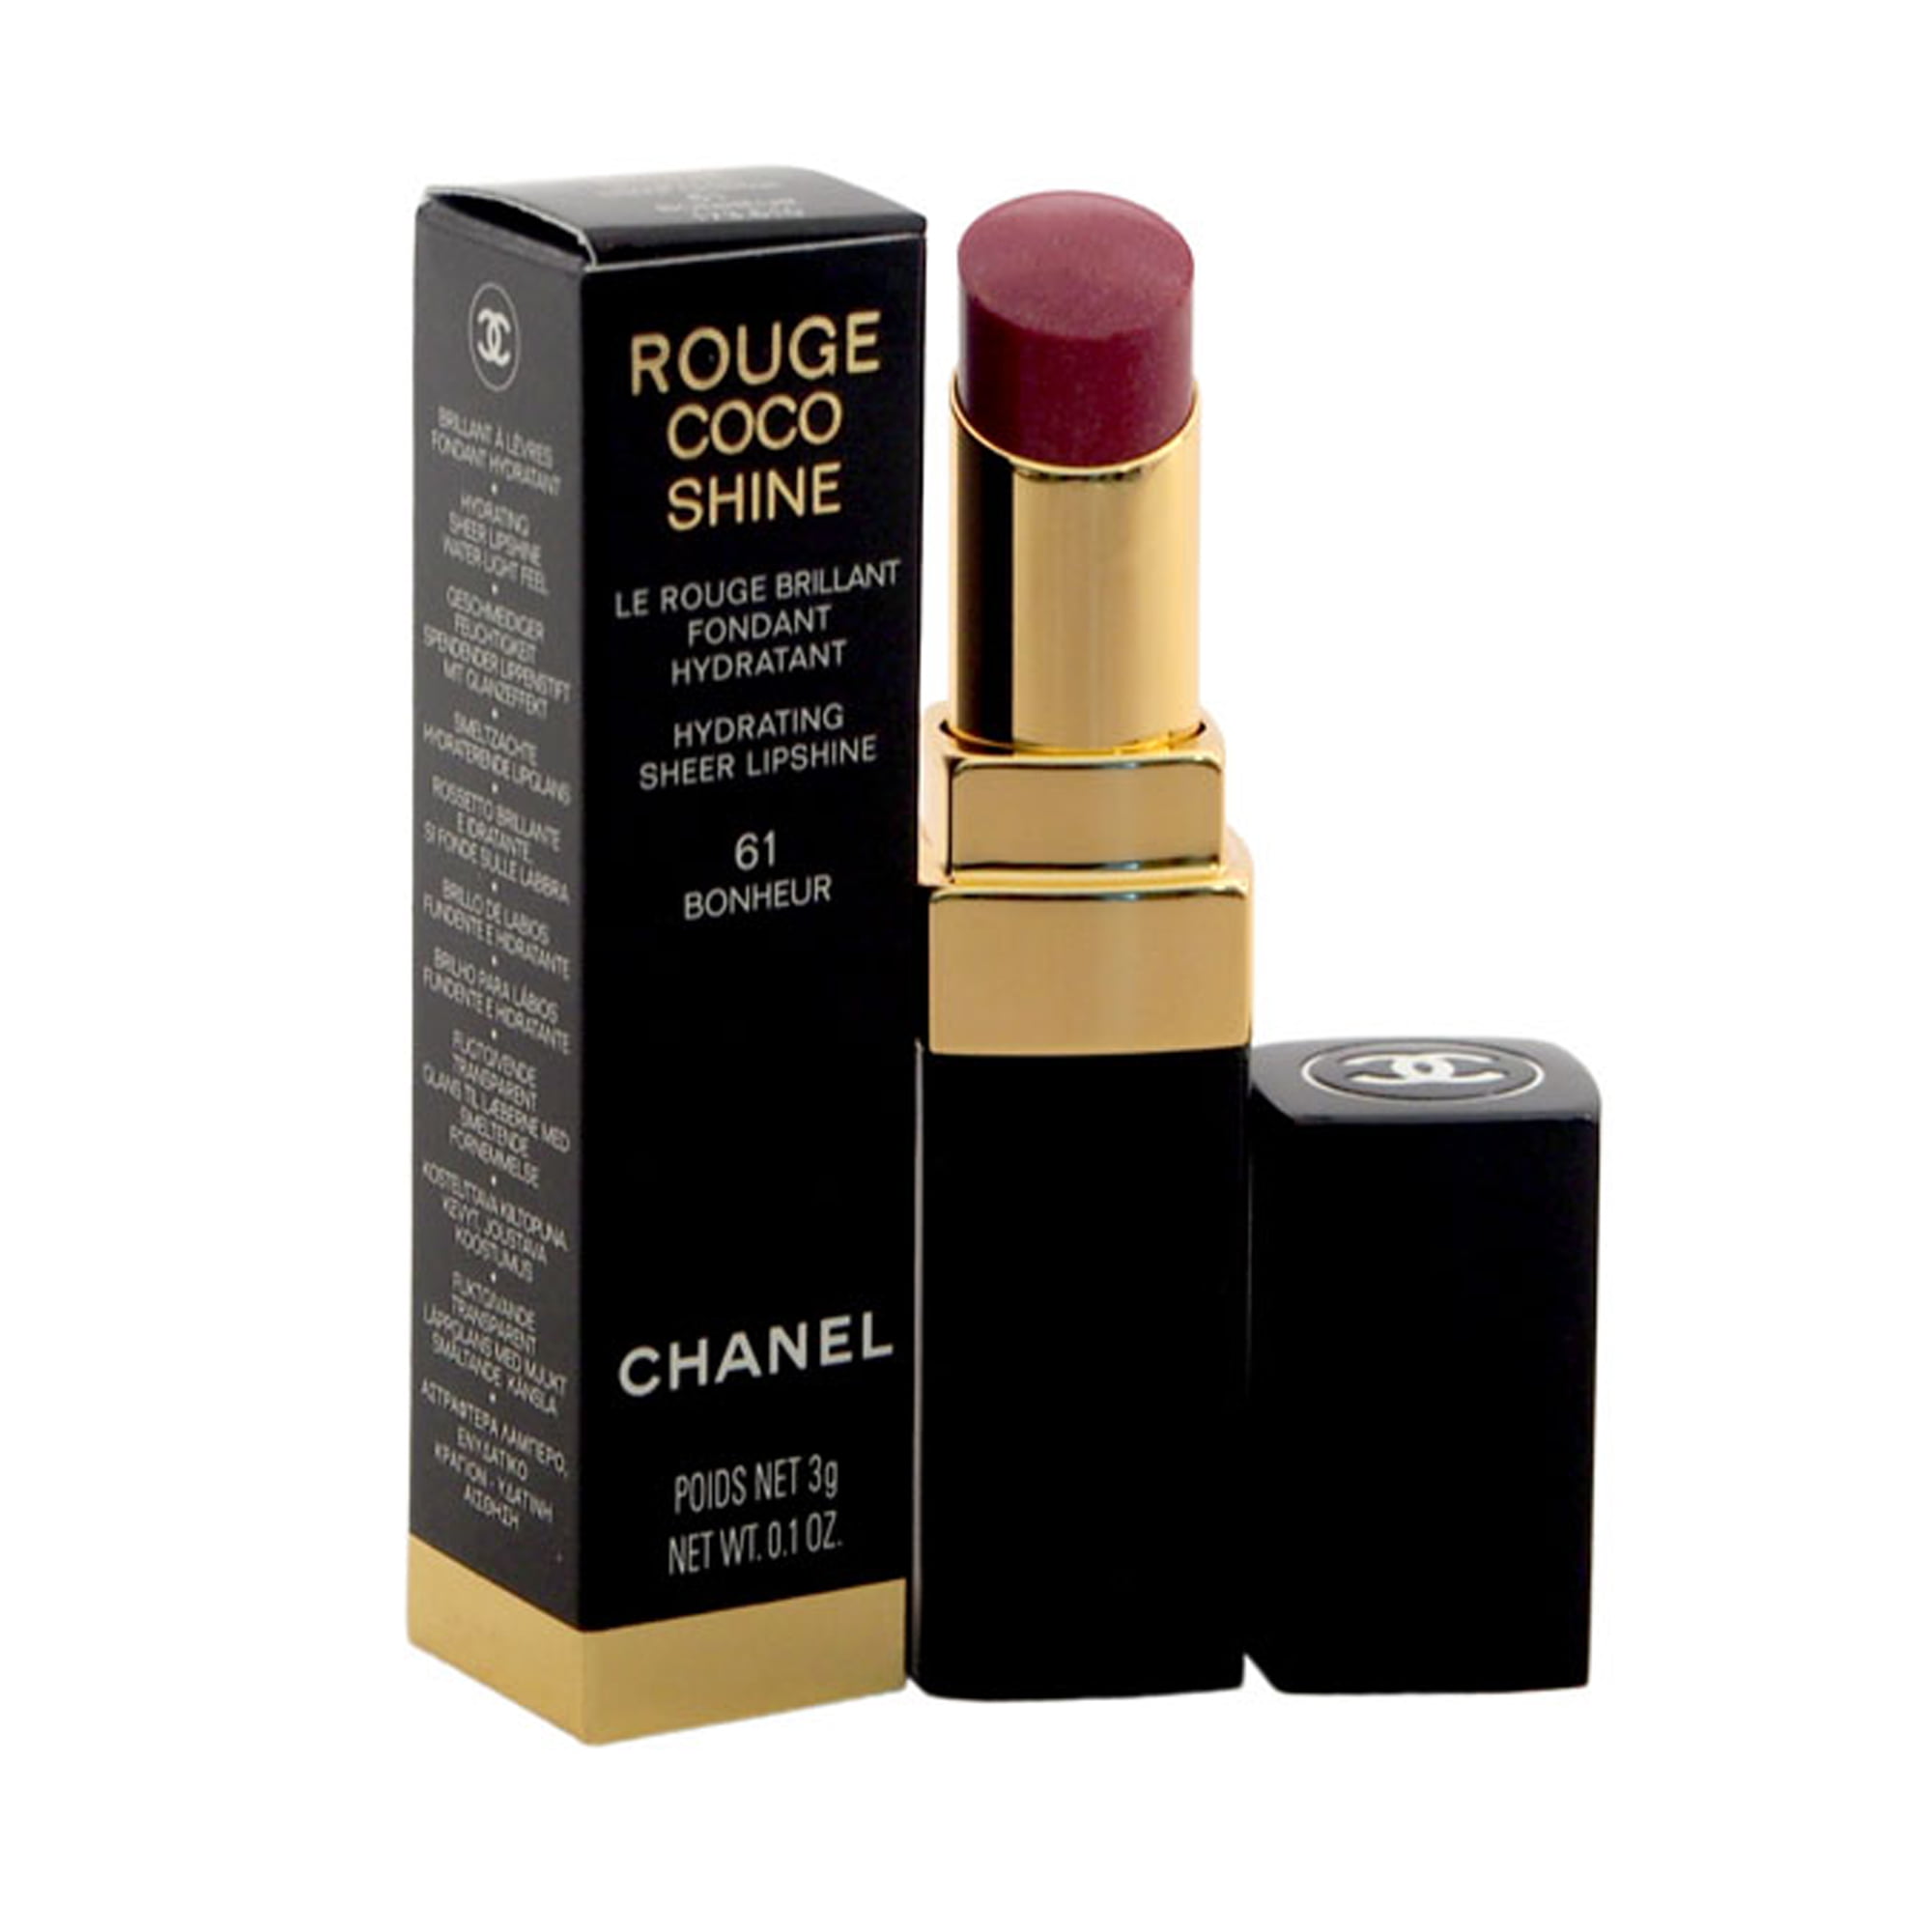 Rouge Coco Shine Hydrating Sheer Lipshine - # 61 Bonheur by Chanel for  Women - 0.1 oz Lip Color